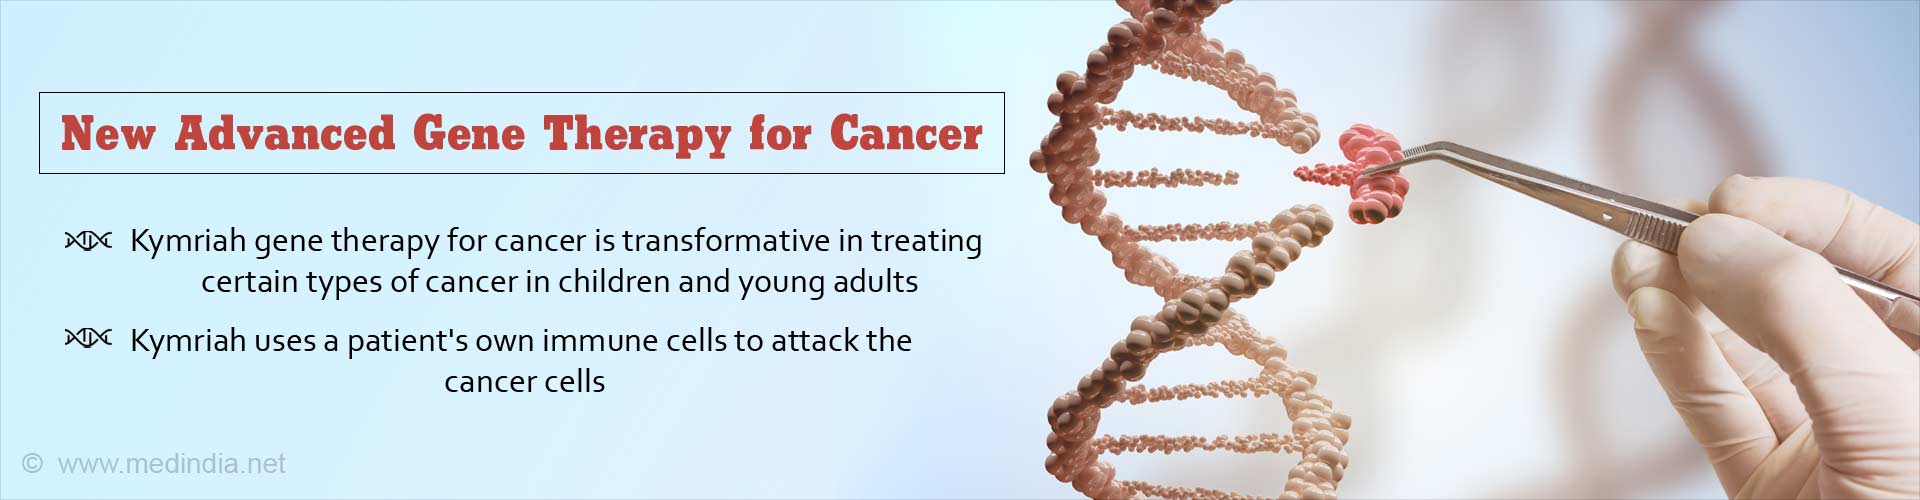 new advanced gene therapy for cancer
- kymriah gene therapy for cancer is transformative in treating certain types of cancer in children and young adults
- kymriah uses a patient's own immune cells to attack the cancer cells